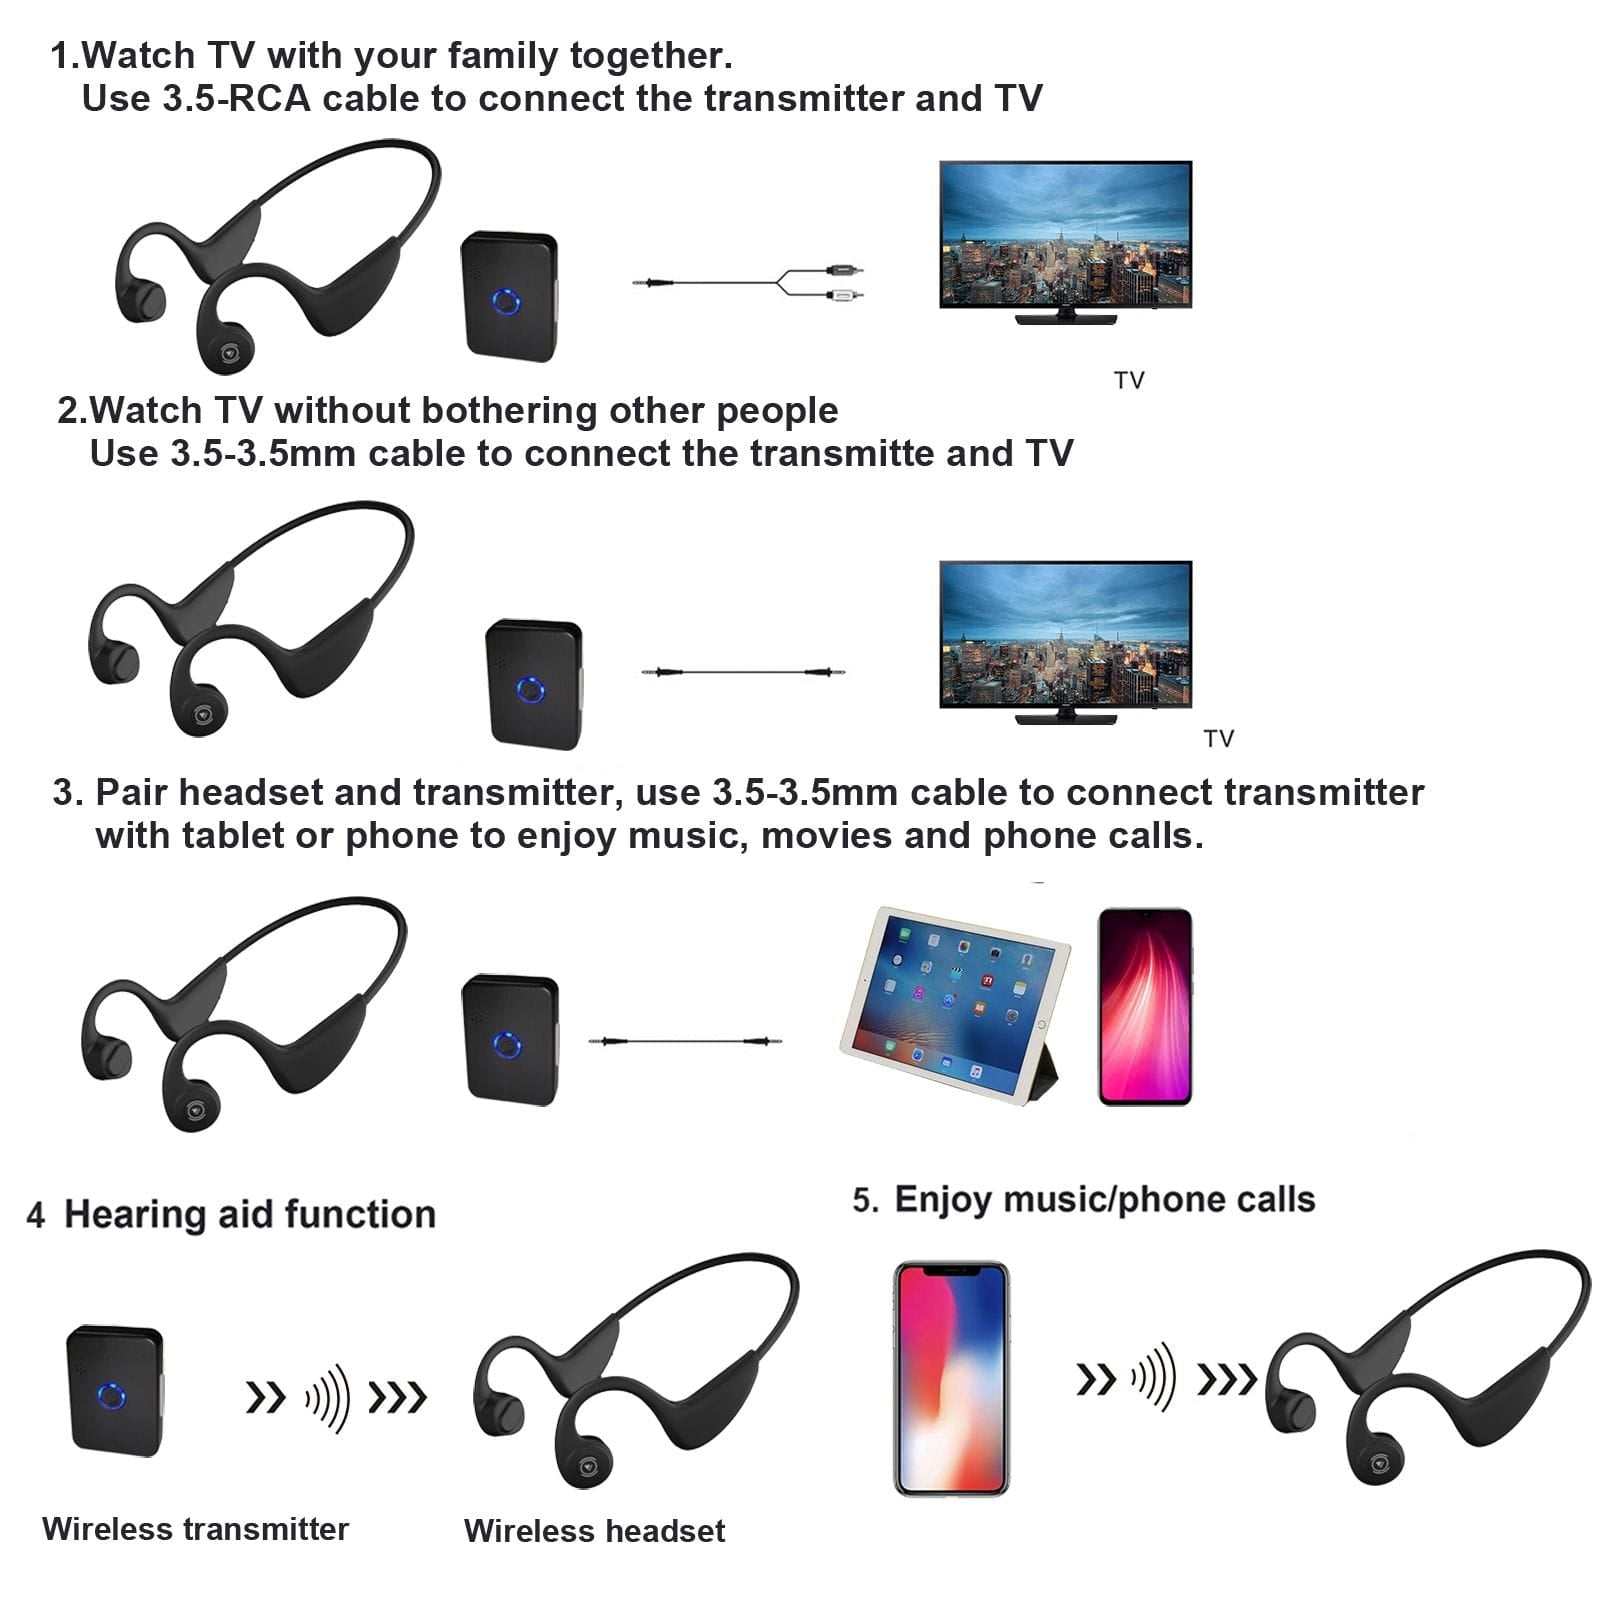 eEAR-BC-Tx eEAR Bone Conduction Hearing Aids with Sound Transmitter. YES, IT'S HEARING AIDS, 2 in ONE, Bone Conduction Bluetooth headphones, military grade technology, and Bone Conduction Hearing Aids.